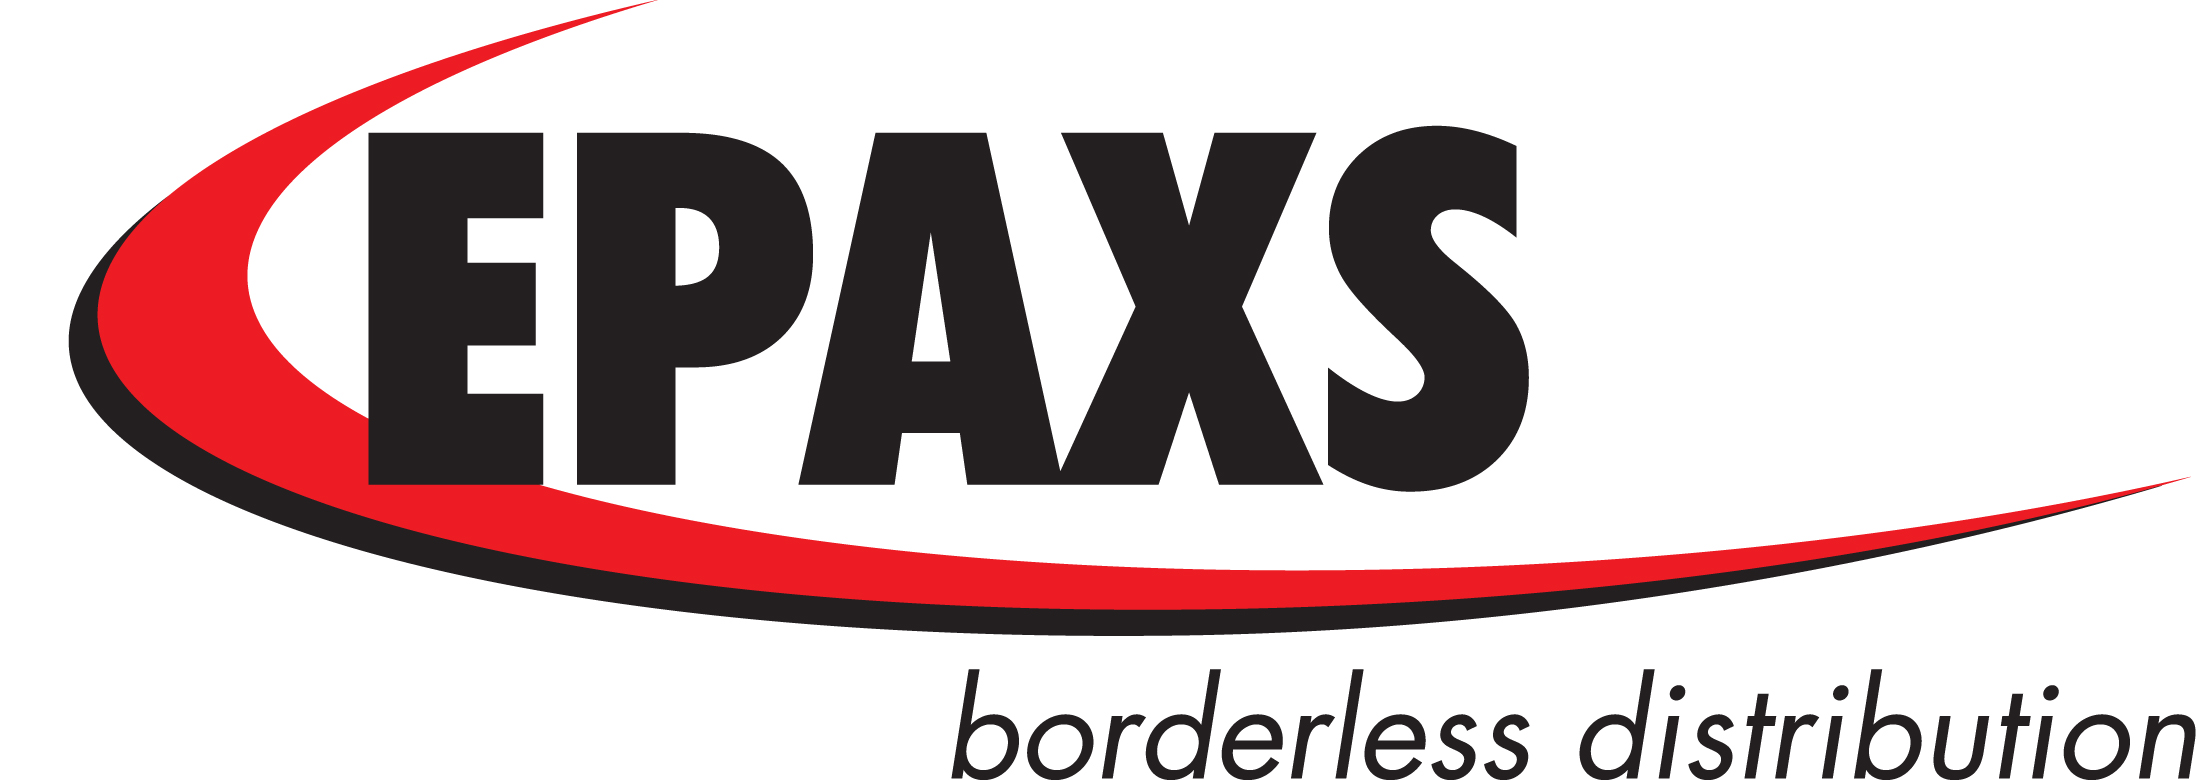 Epaxs Couriers